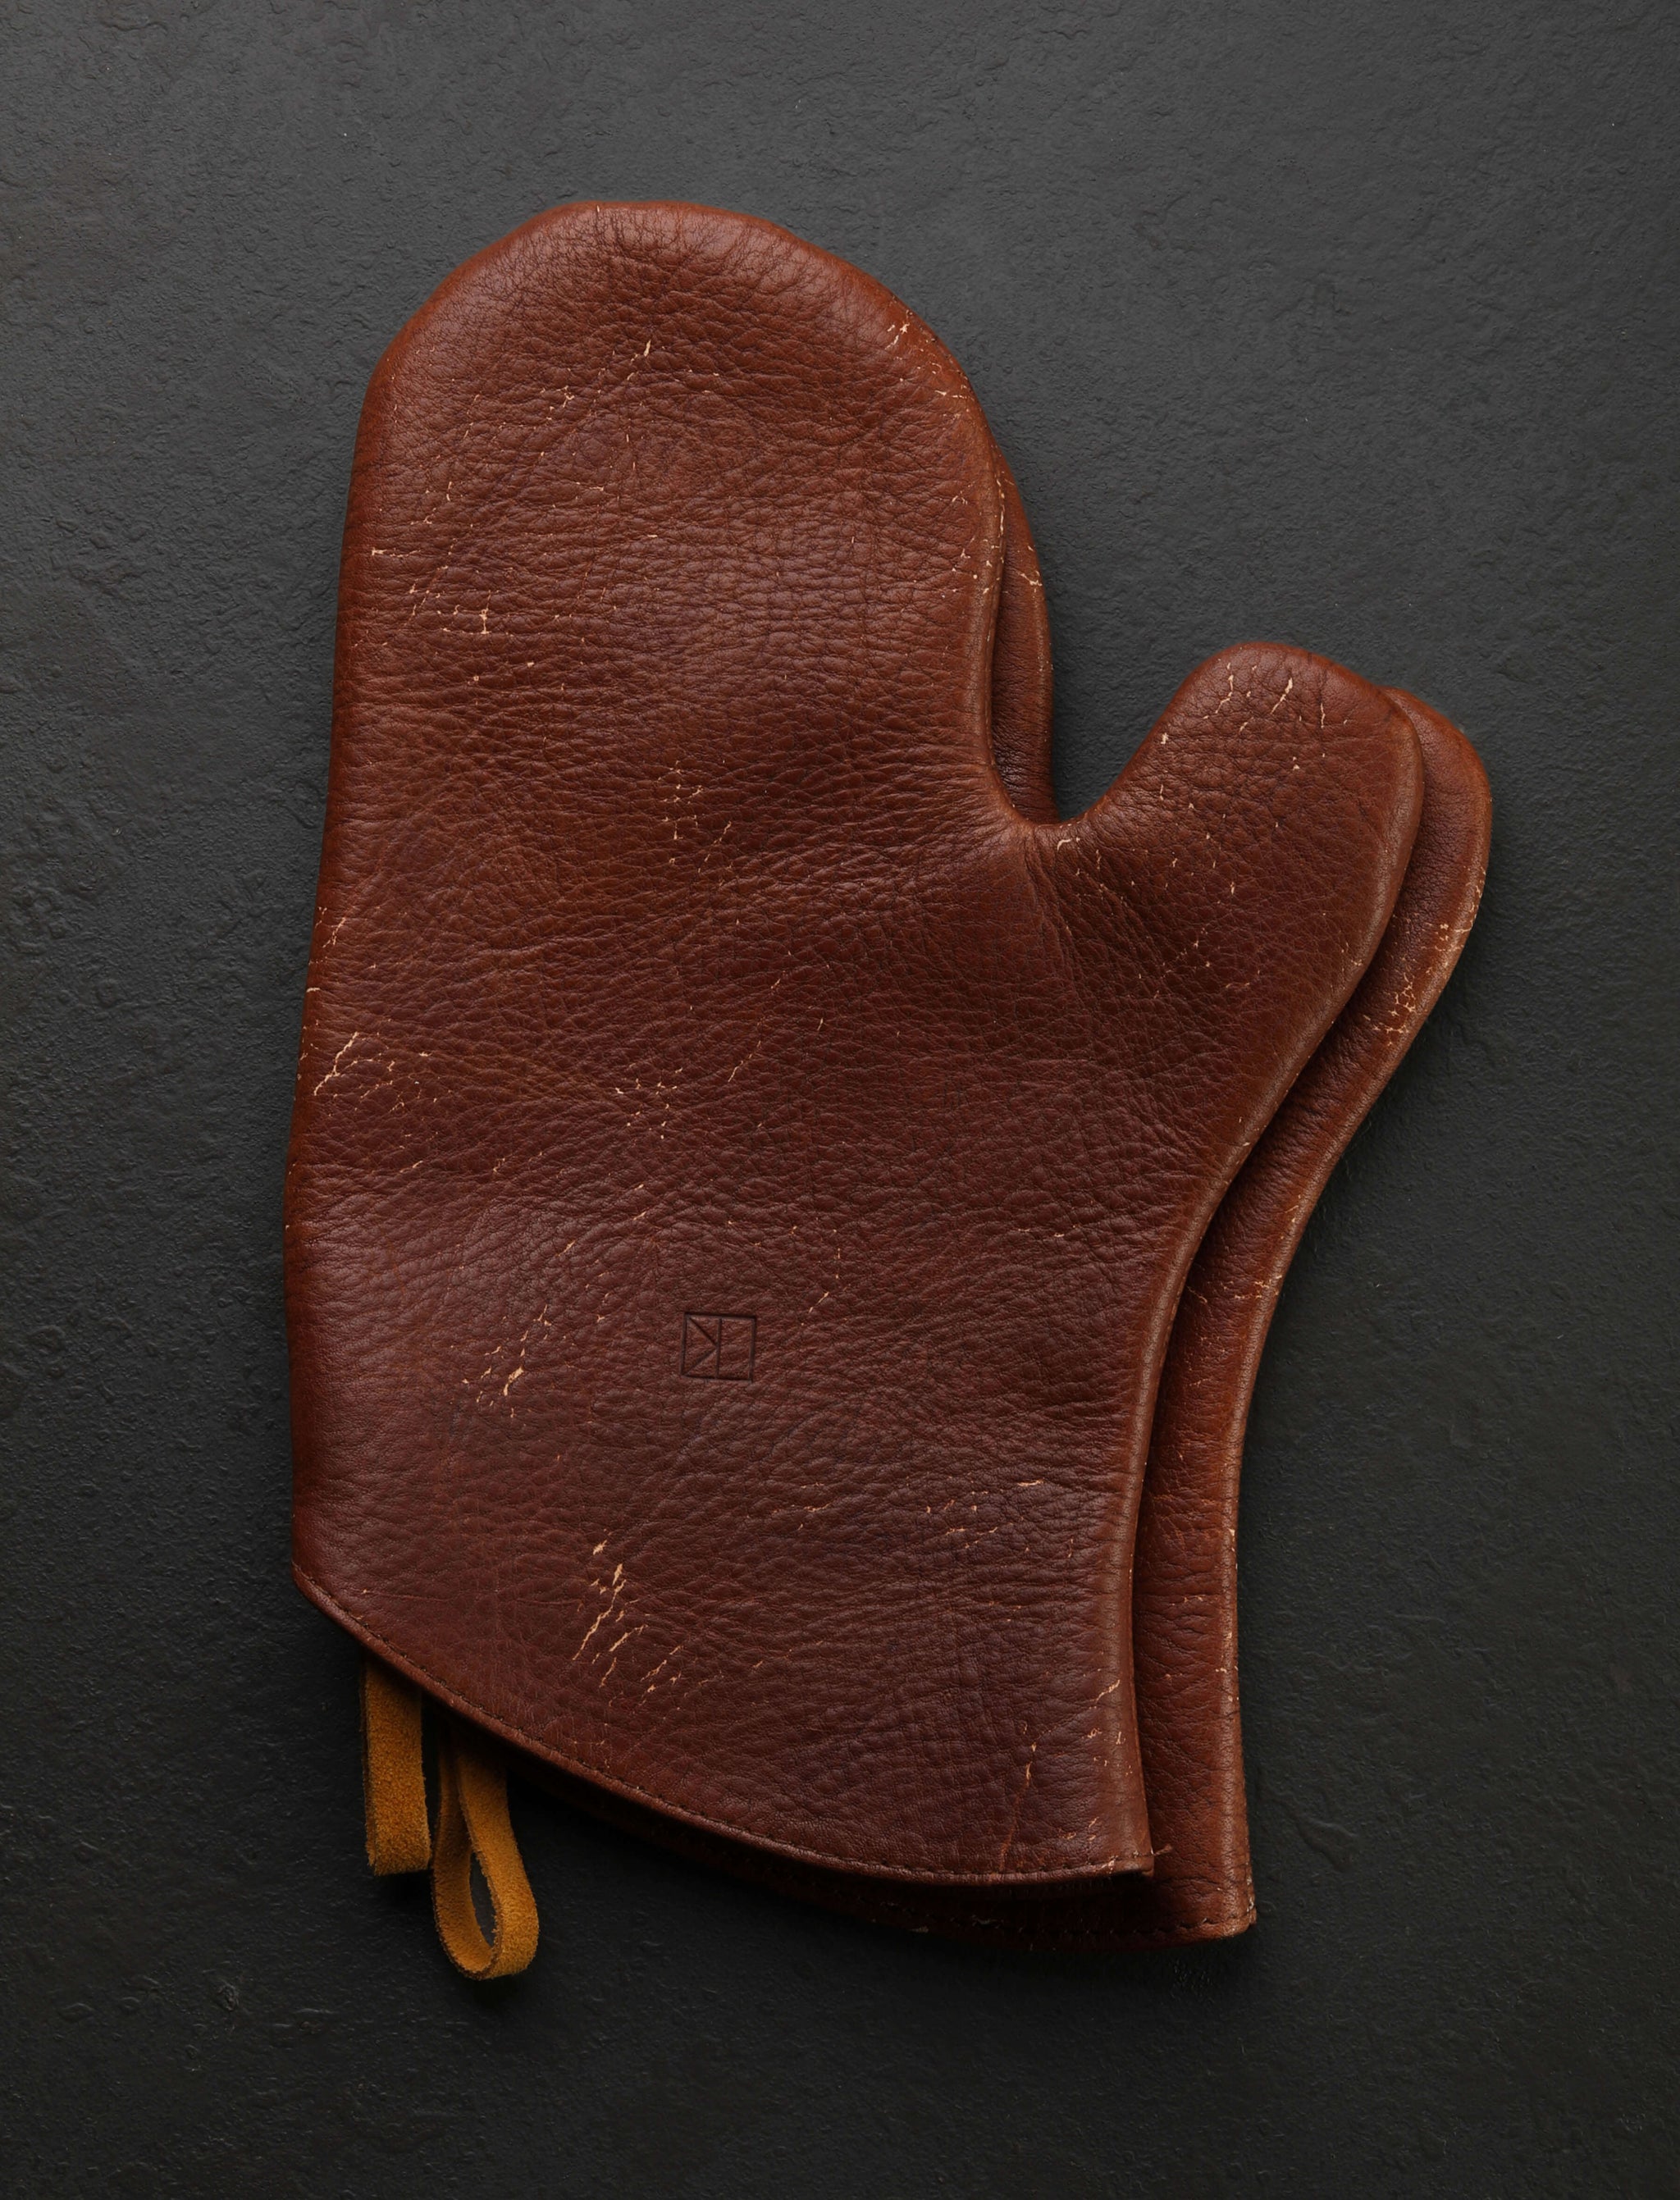 Linny Kenney Leather - New Hampshire Accessories & Apparel Timber Leather Oven Mitts